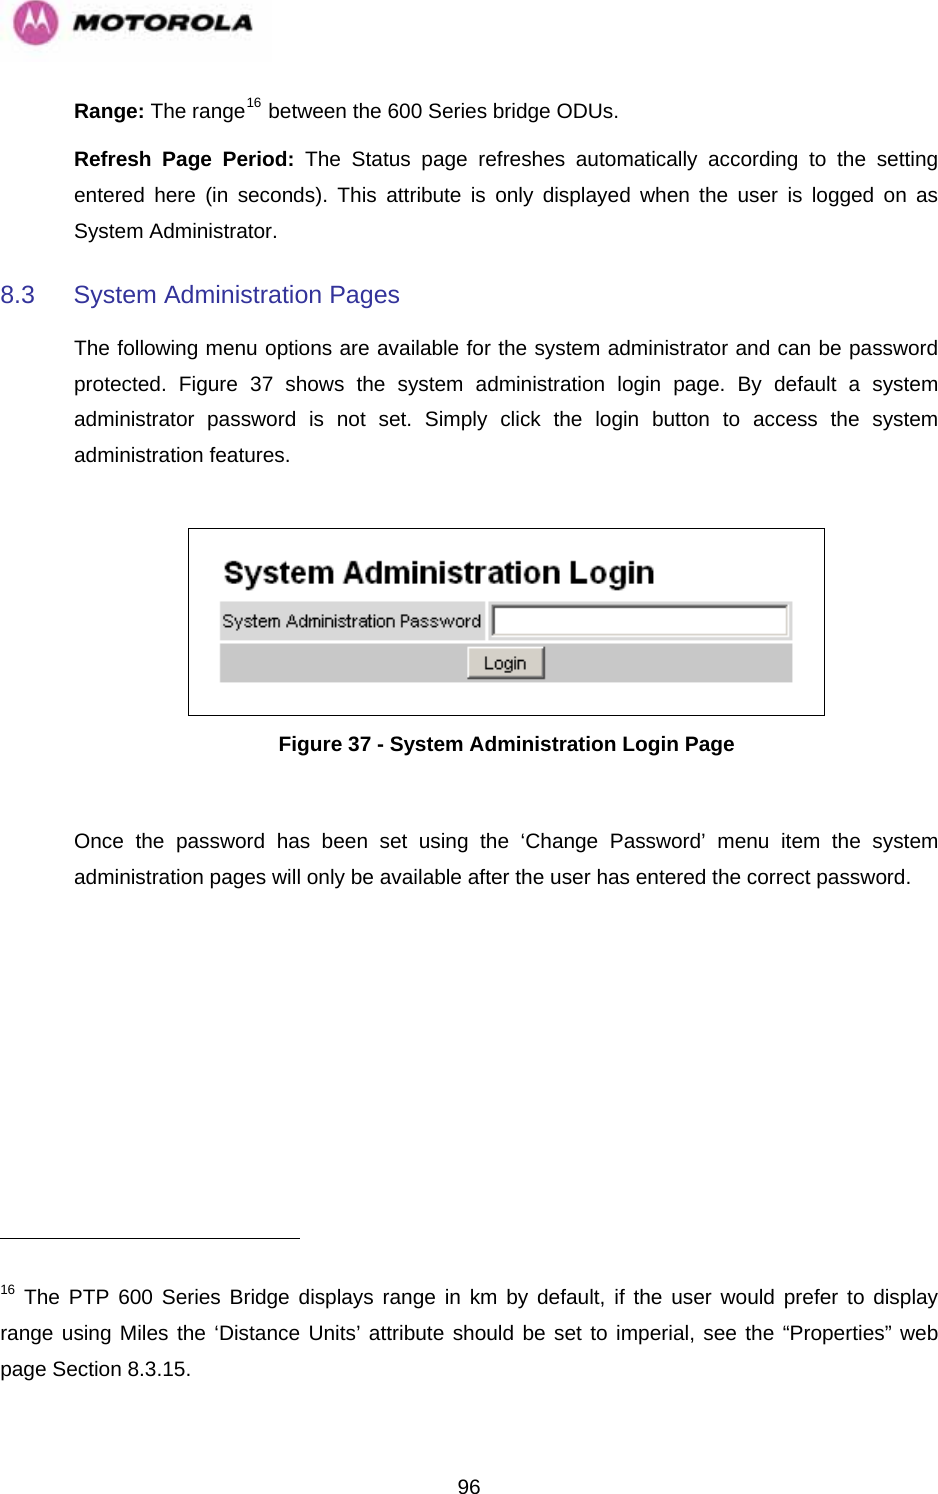   96Range: The range16 between the 600 Series bridge ODUs.  Refresh Page Period: The Status page refreshes automatically according to the setting entered here (in seconds). This attribute is only displayed when the user is logged on as System Administrator. 8.3  System Administration Pages  The following menu options are available for the system administrator and can be password protected.  Figure 37 shows the system administration login page. By default a system administrator password is not set. Simply click the login button to access the system administration features.    Figure 37 - System Administration Login Page  Once the password has been set using the ‘Change Password’ menu item the system administration pages will only be available after the user has entered the correct password.                                                       16 The PTP 600 Series Bridge displays range in km by default, if the user would prefer to display range using Miles the ‘Distance Units’ attribute should be set to imperial, see the “ ” web page Section 8.3.15. Properties